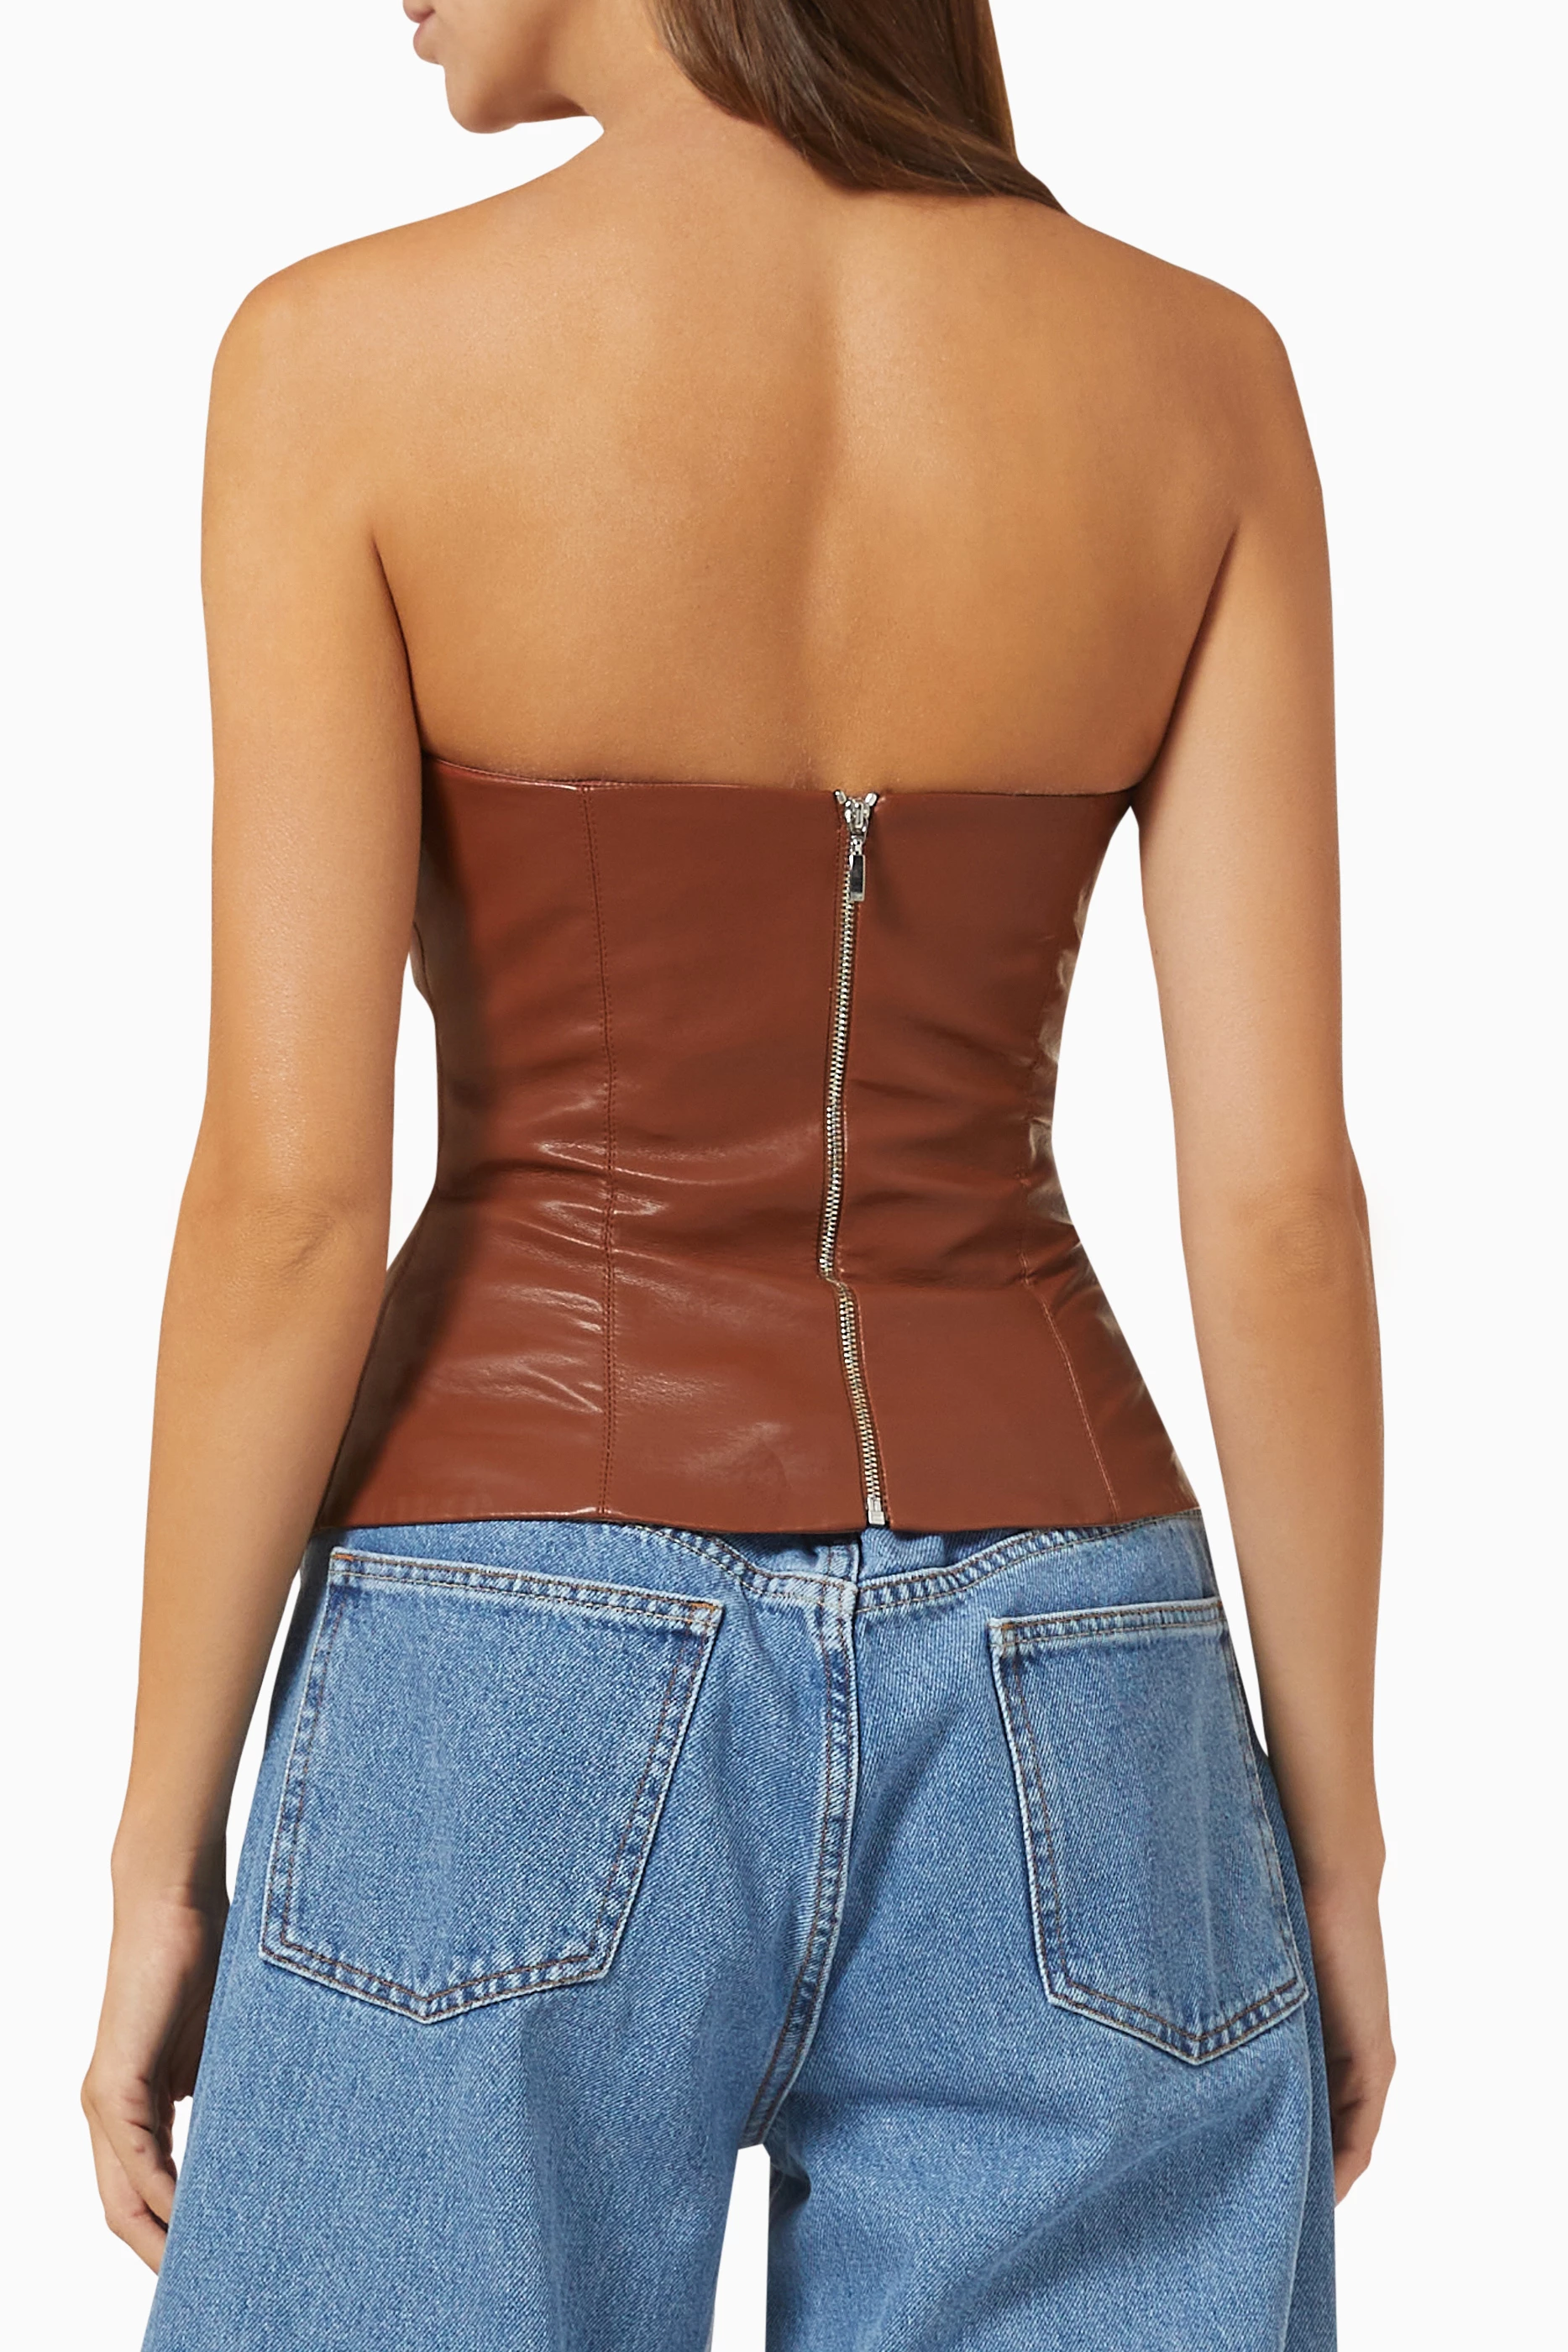 $588 Rozie Corsets Woman's Ivory Faux-Leather Corset Top Size FR38 / US6